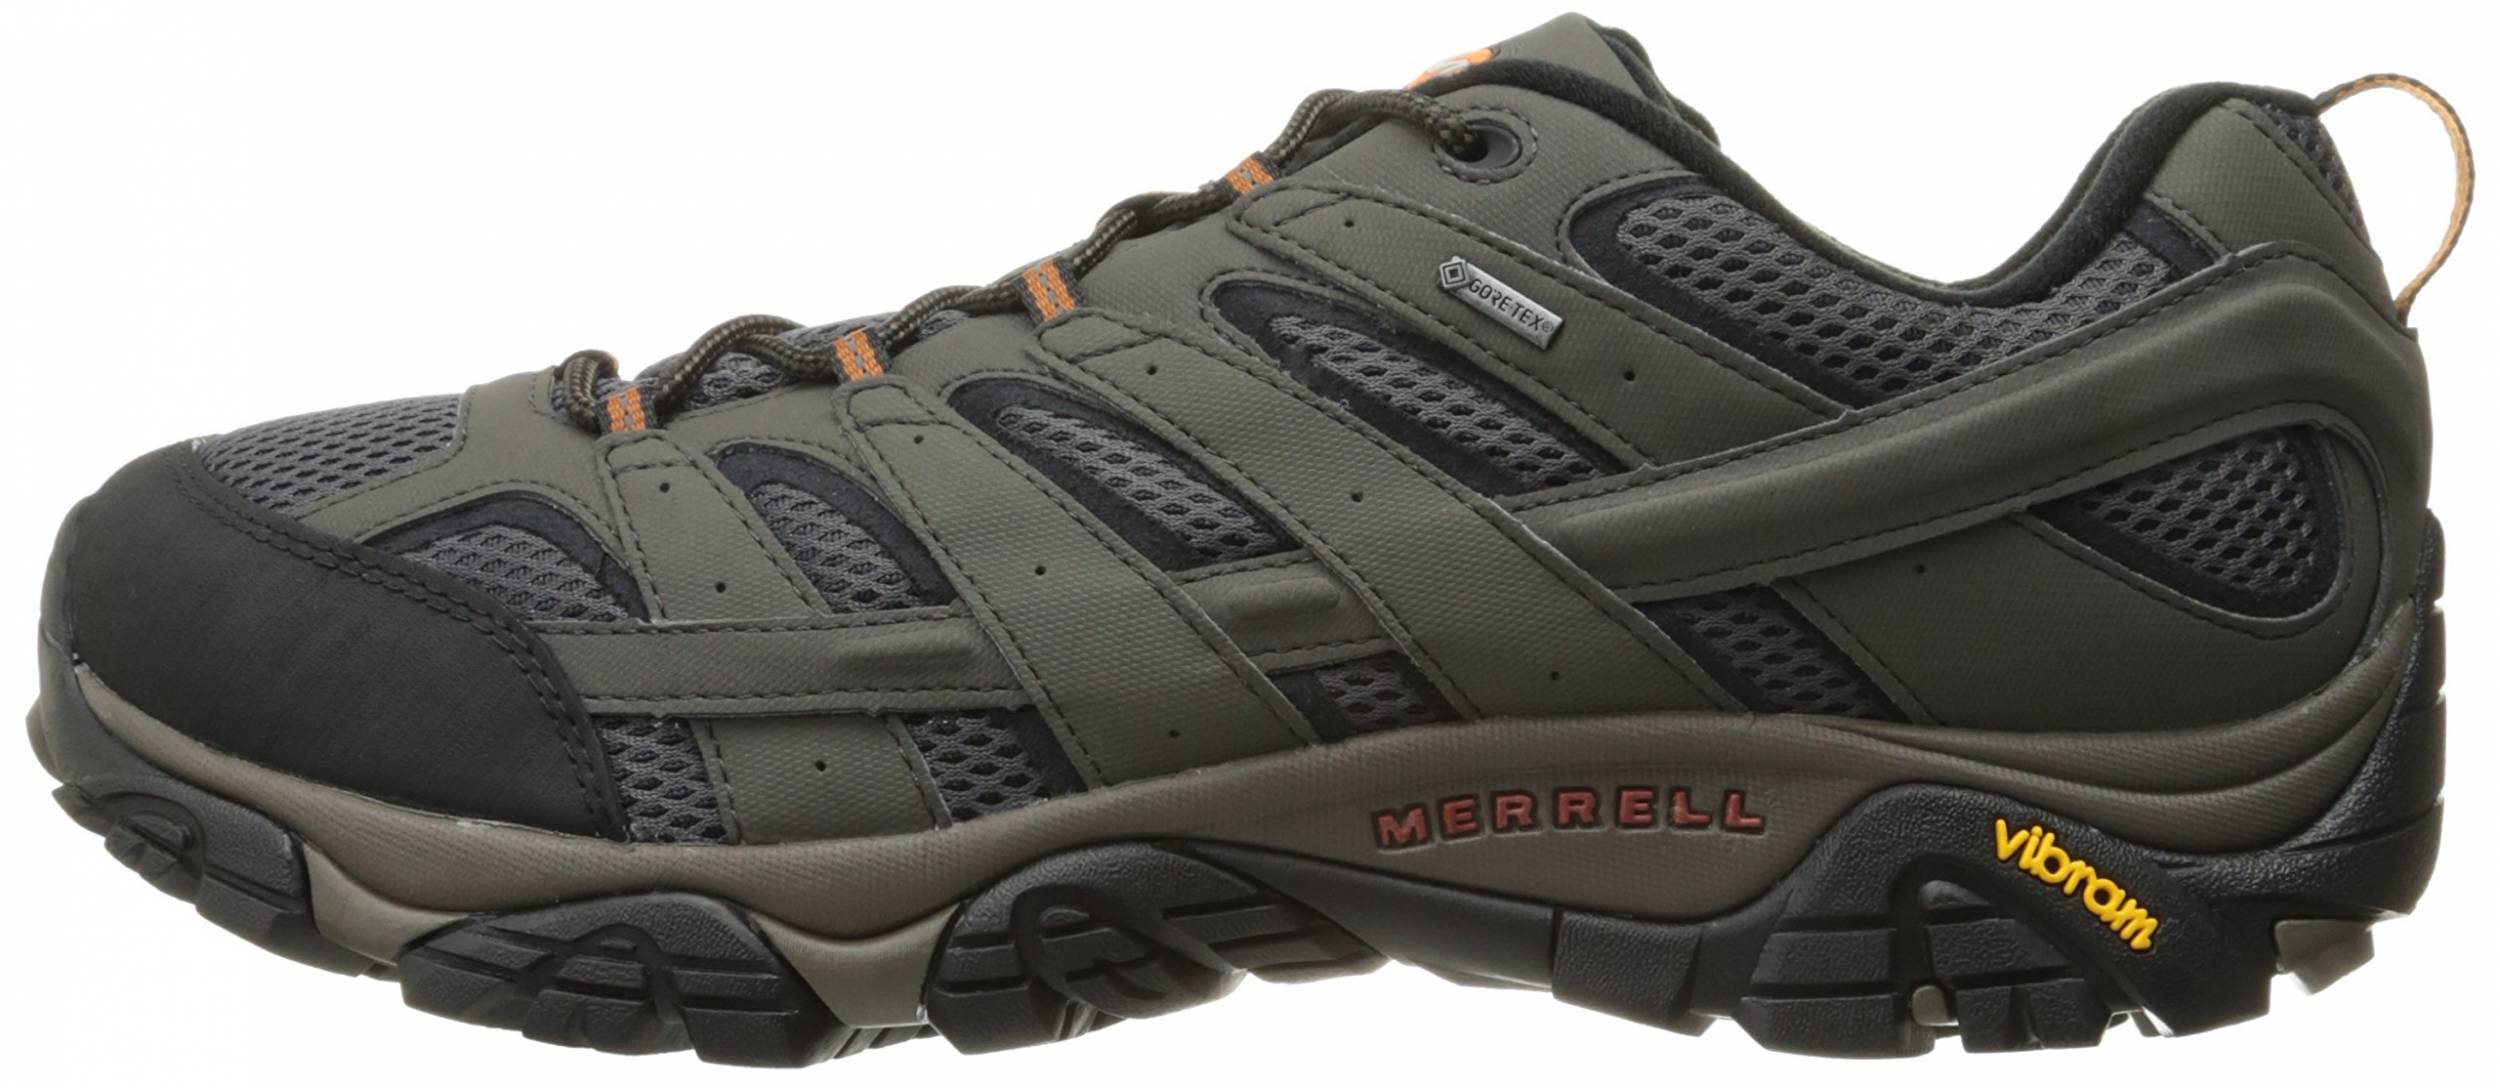 Only $78 + Review of Merrell Moab 2 GTX 